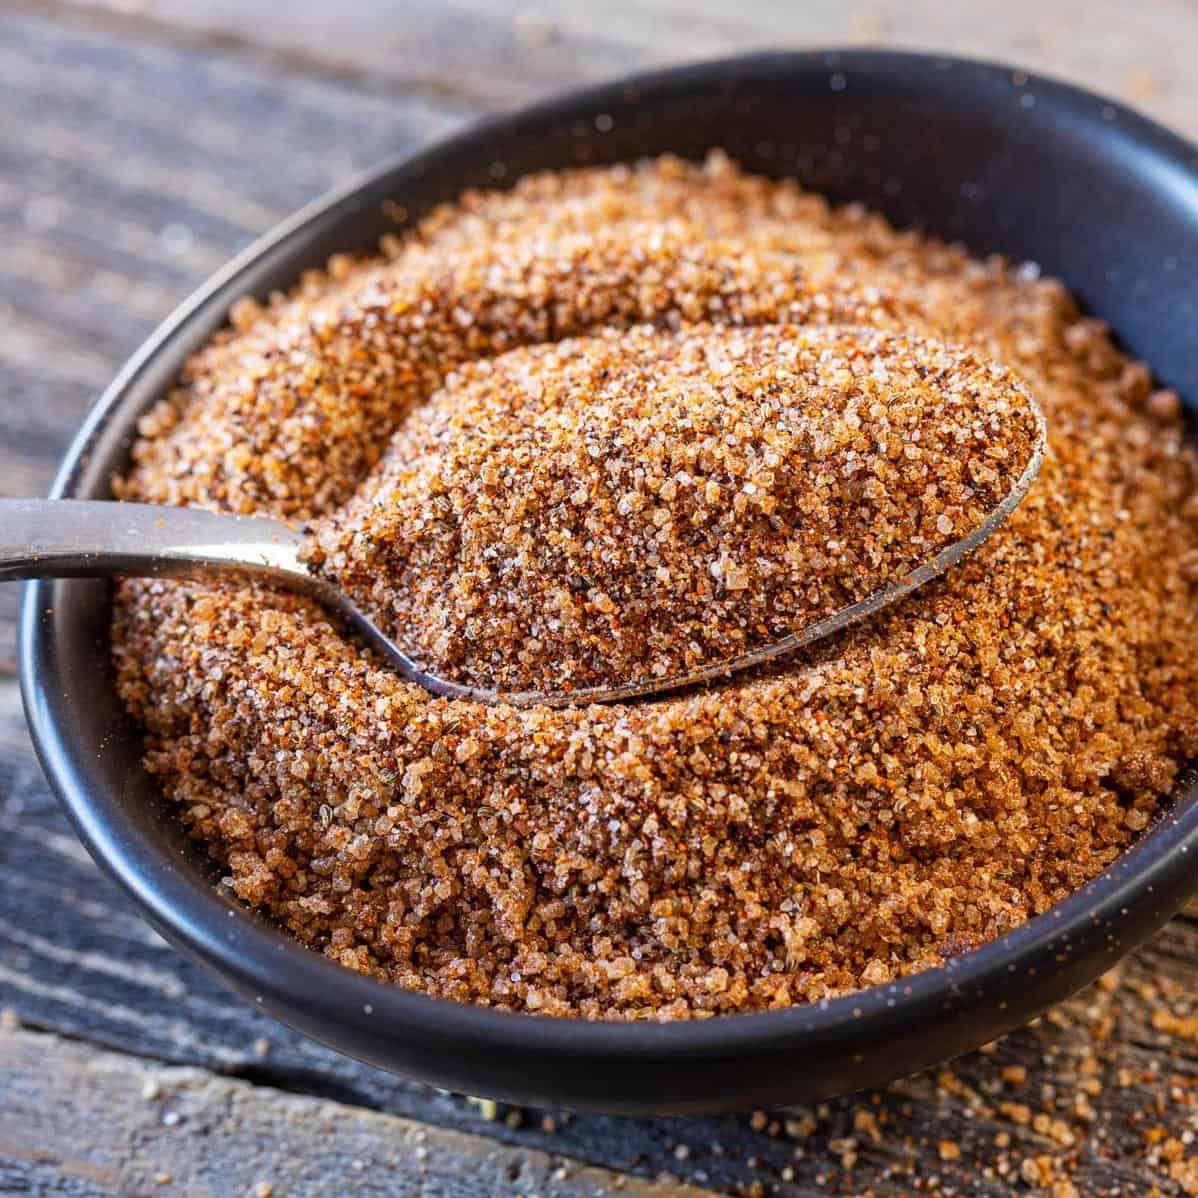  Give your meat a sweet and spicy twist with our chipotle rub.